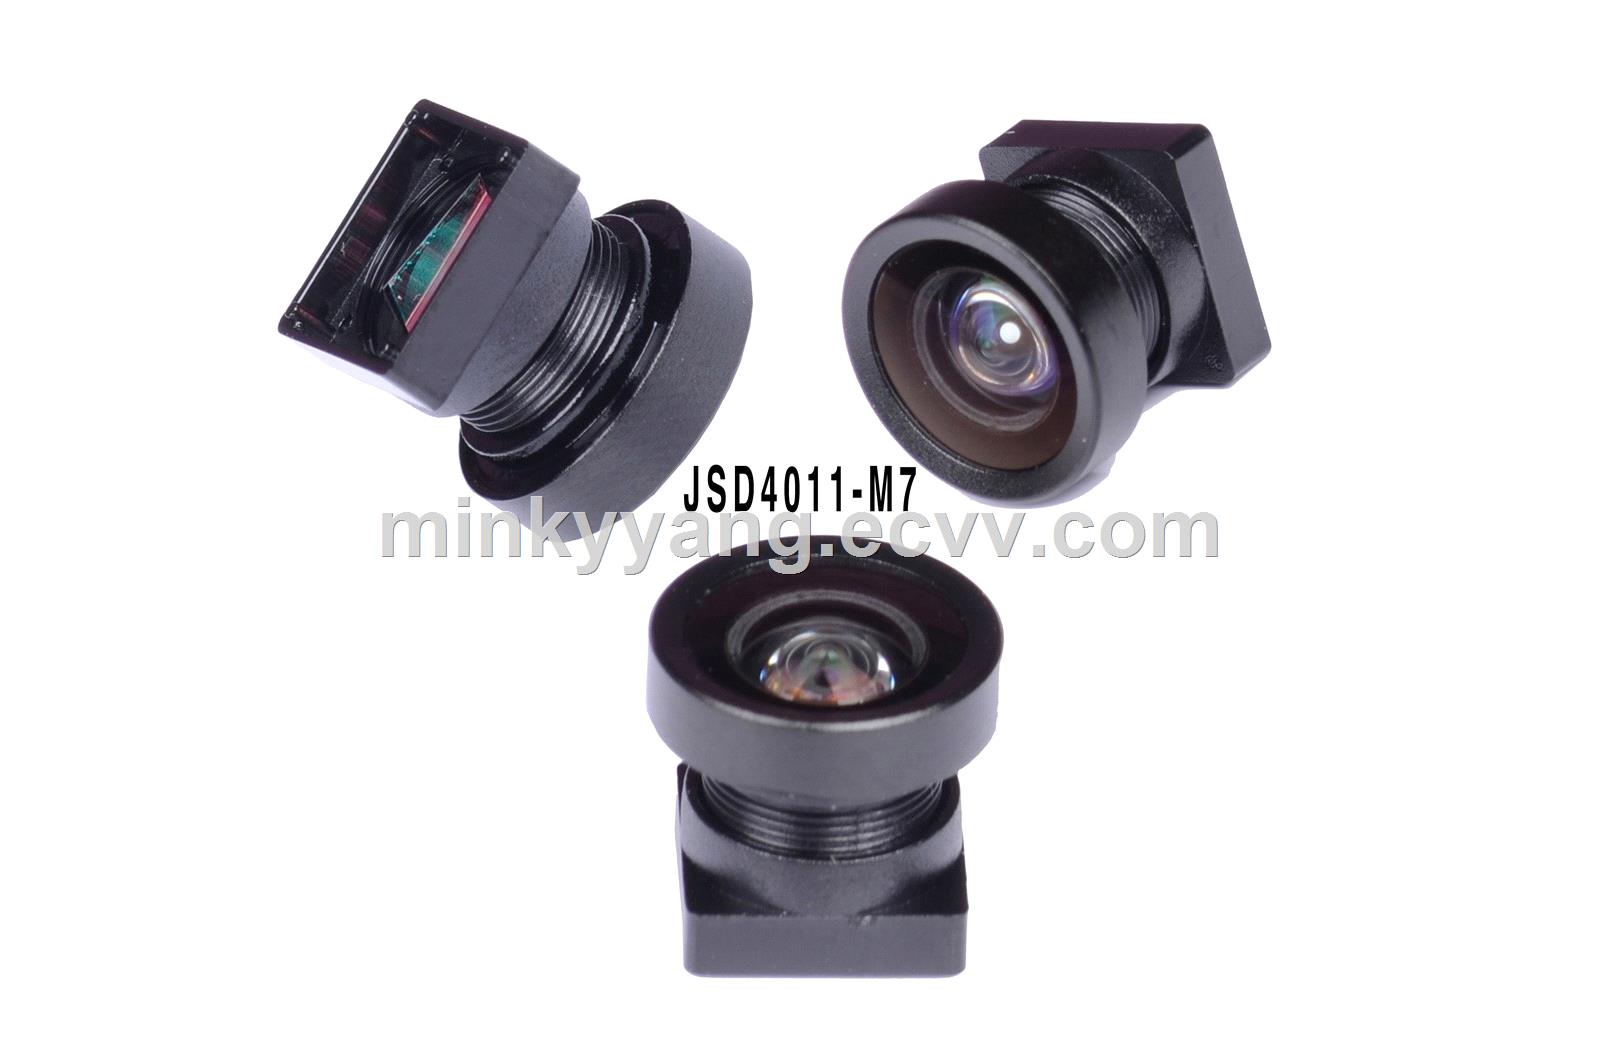 095mm fixed iris m12 cctv camera wide angle lens for car